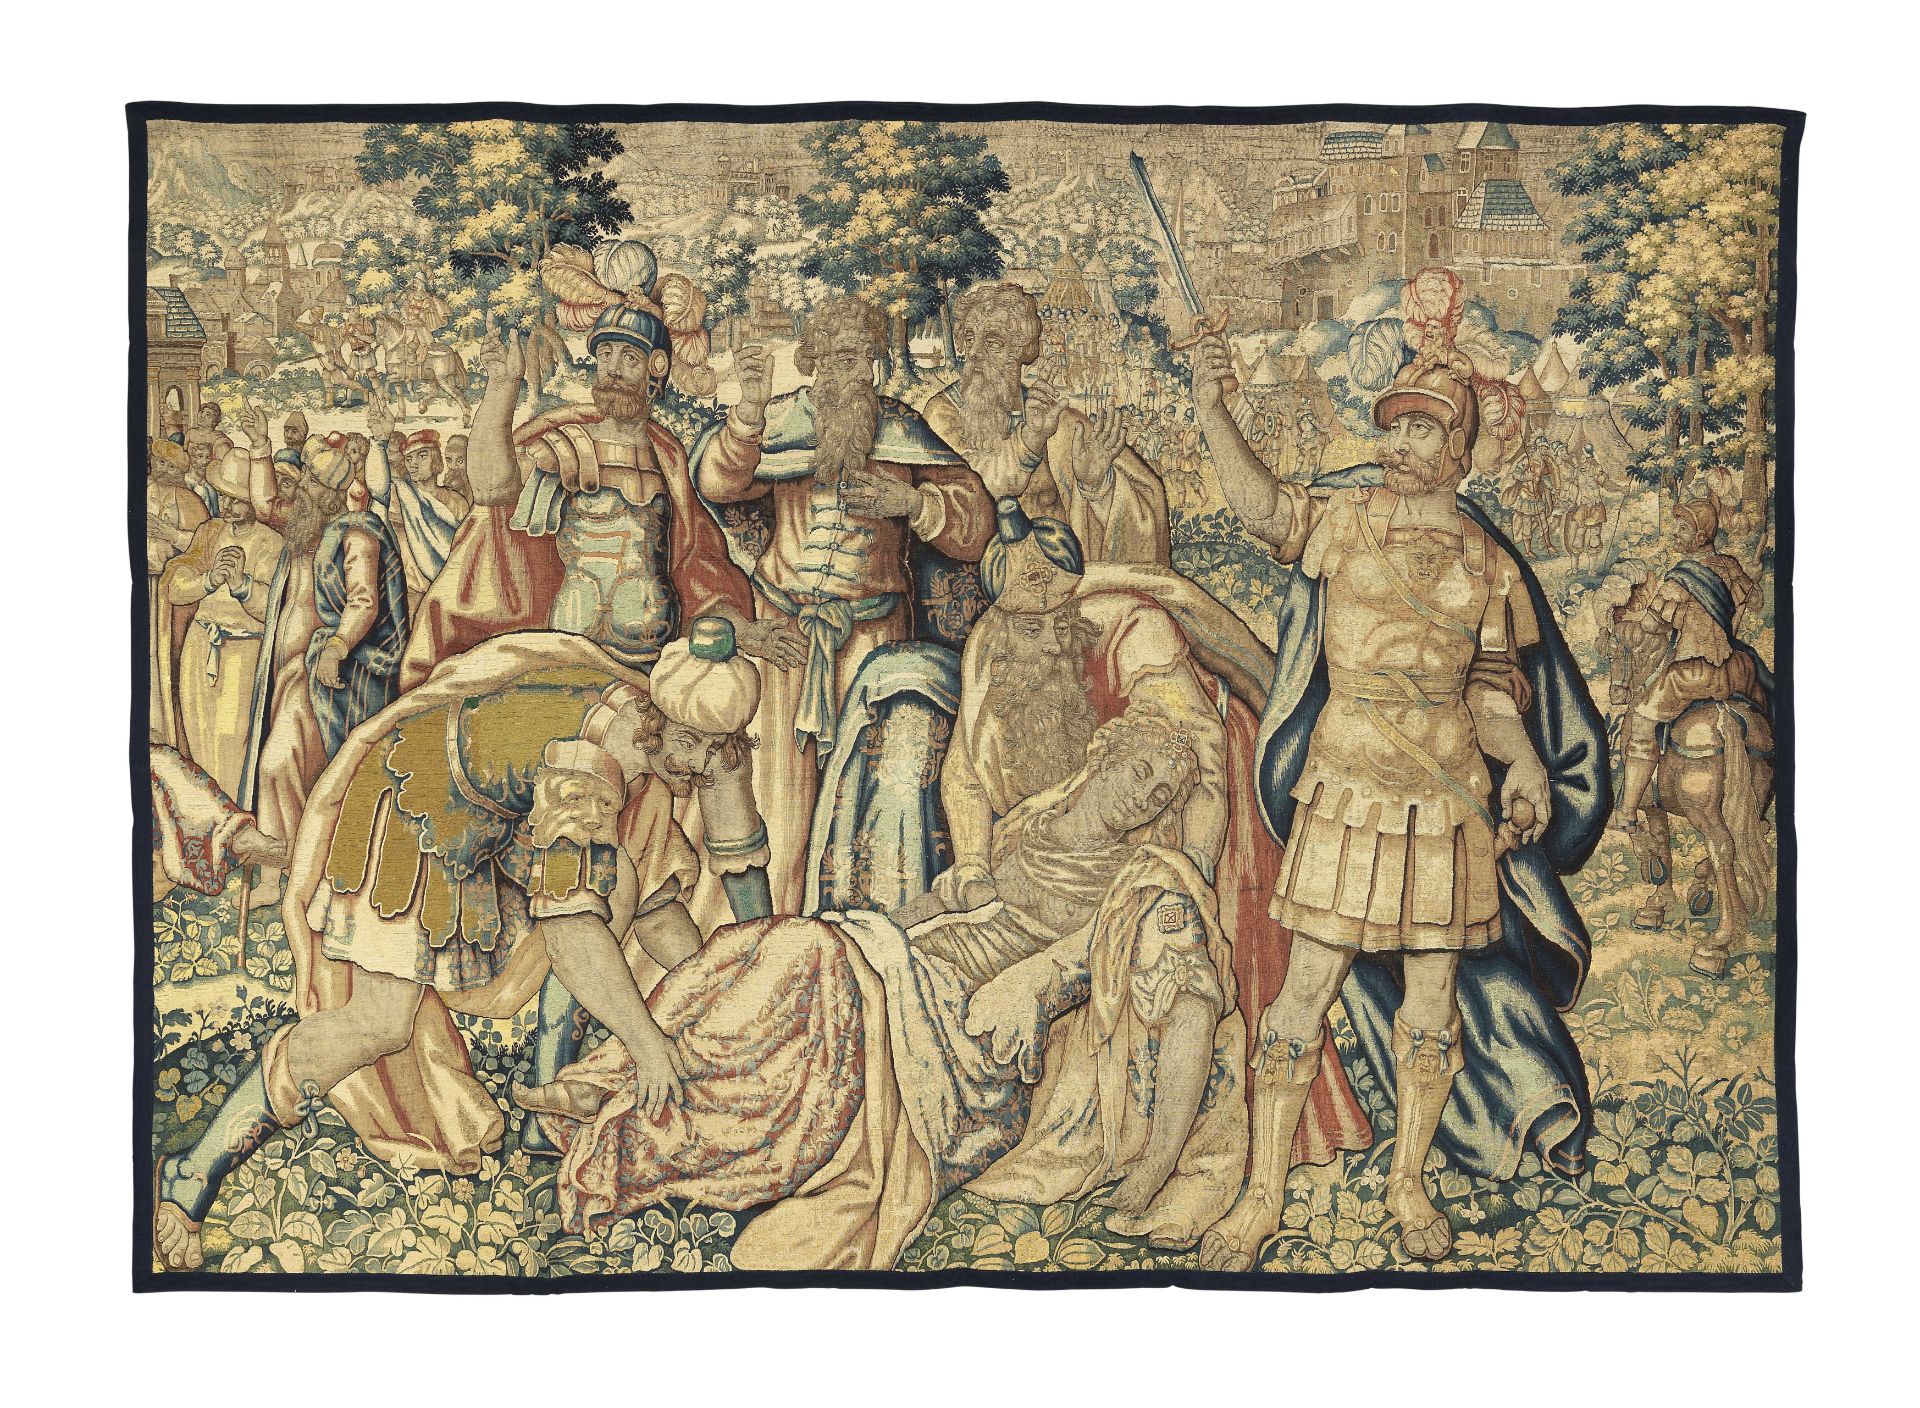 A IMPRESSIVE AND VIBRANT MYTHICAL FLEMISH TAPESTRY SHOWING A SCENE FROM THE AENEID, early to mid ...